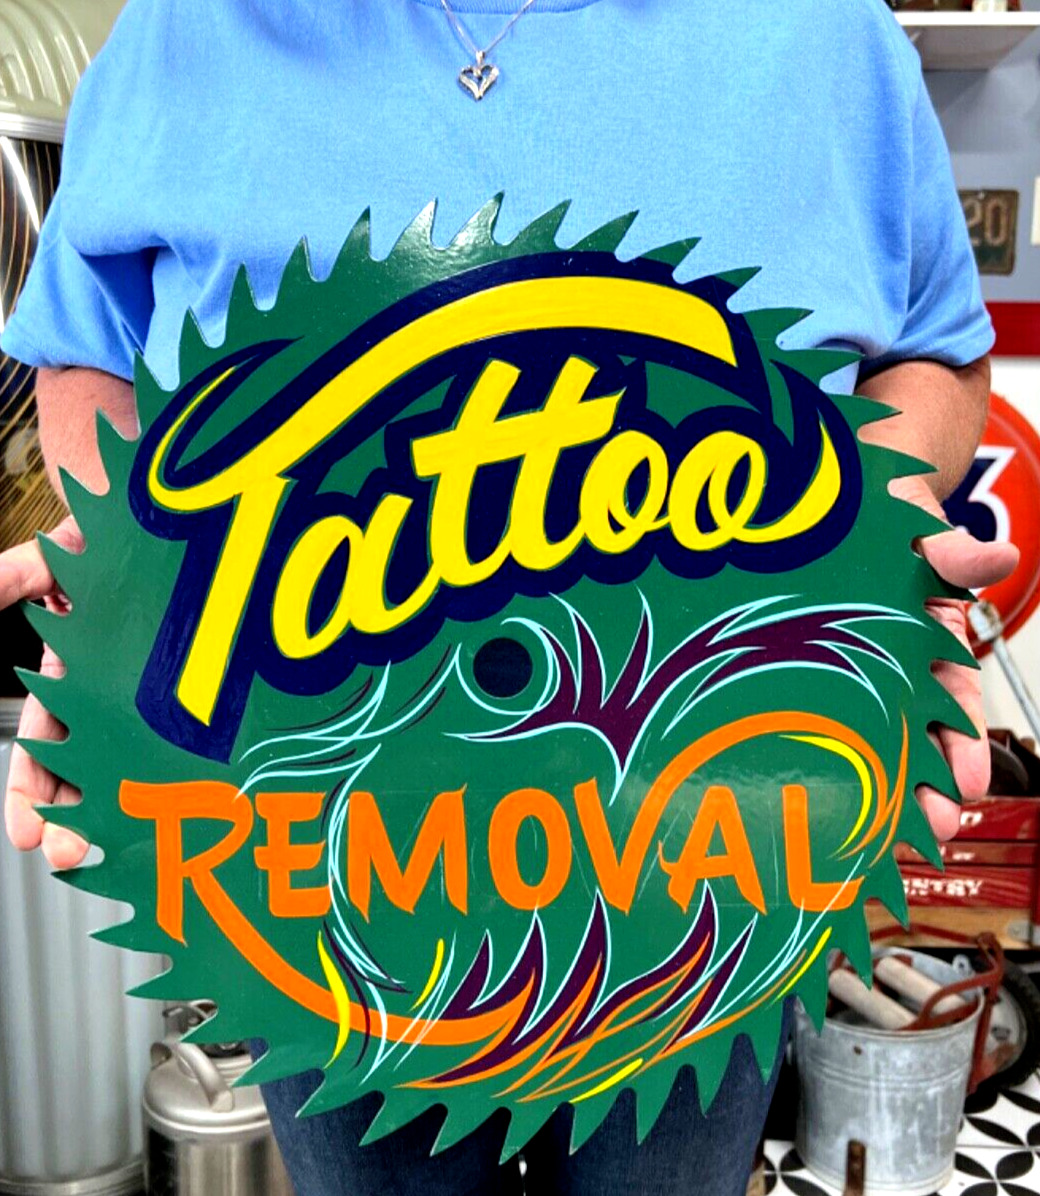 Lg TATTOO REMOVAL Hand Saw Blade SIGN Hand Painted Pinstriped ARTIST Shop Studio